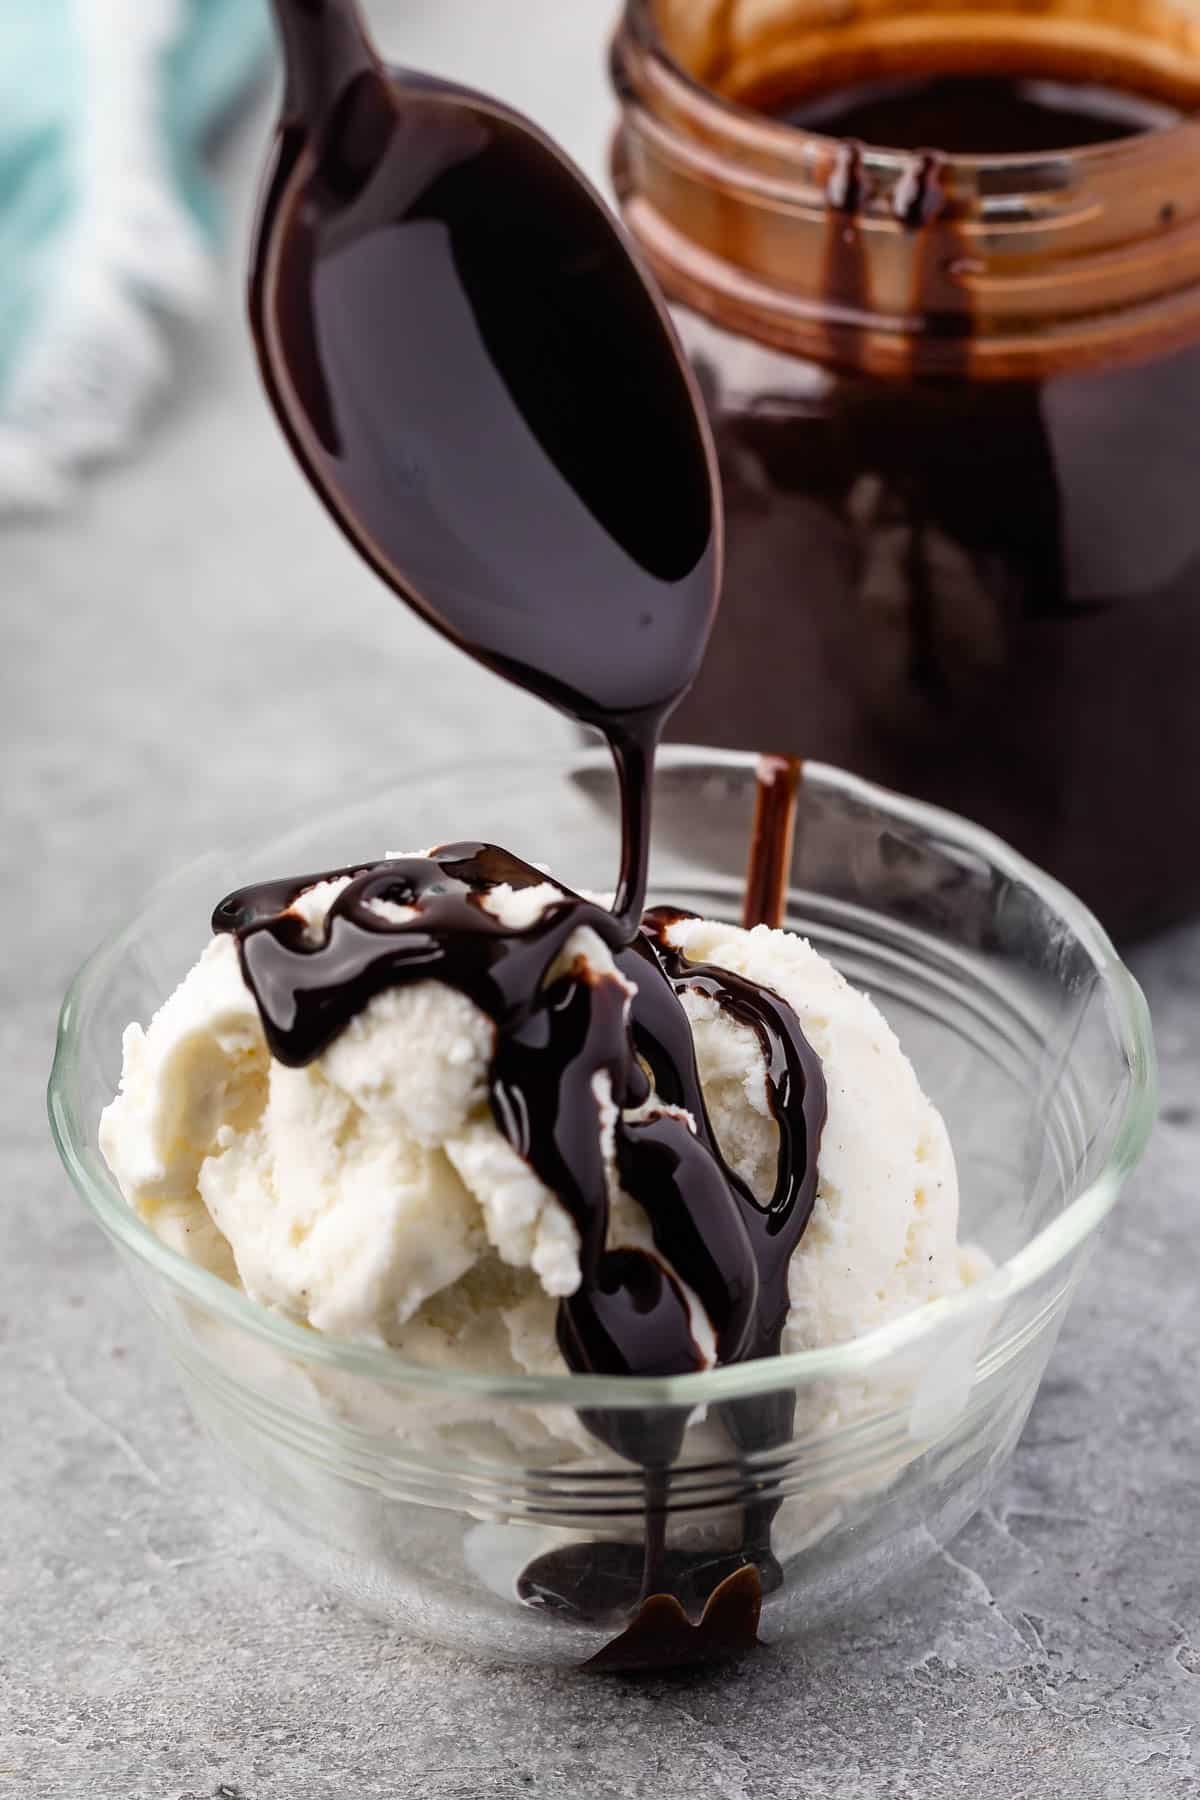 a spoon dripping chocolate sauce over vanilla ice cream in a clear bowl.